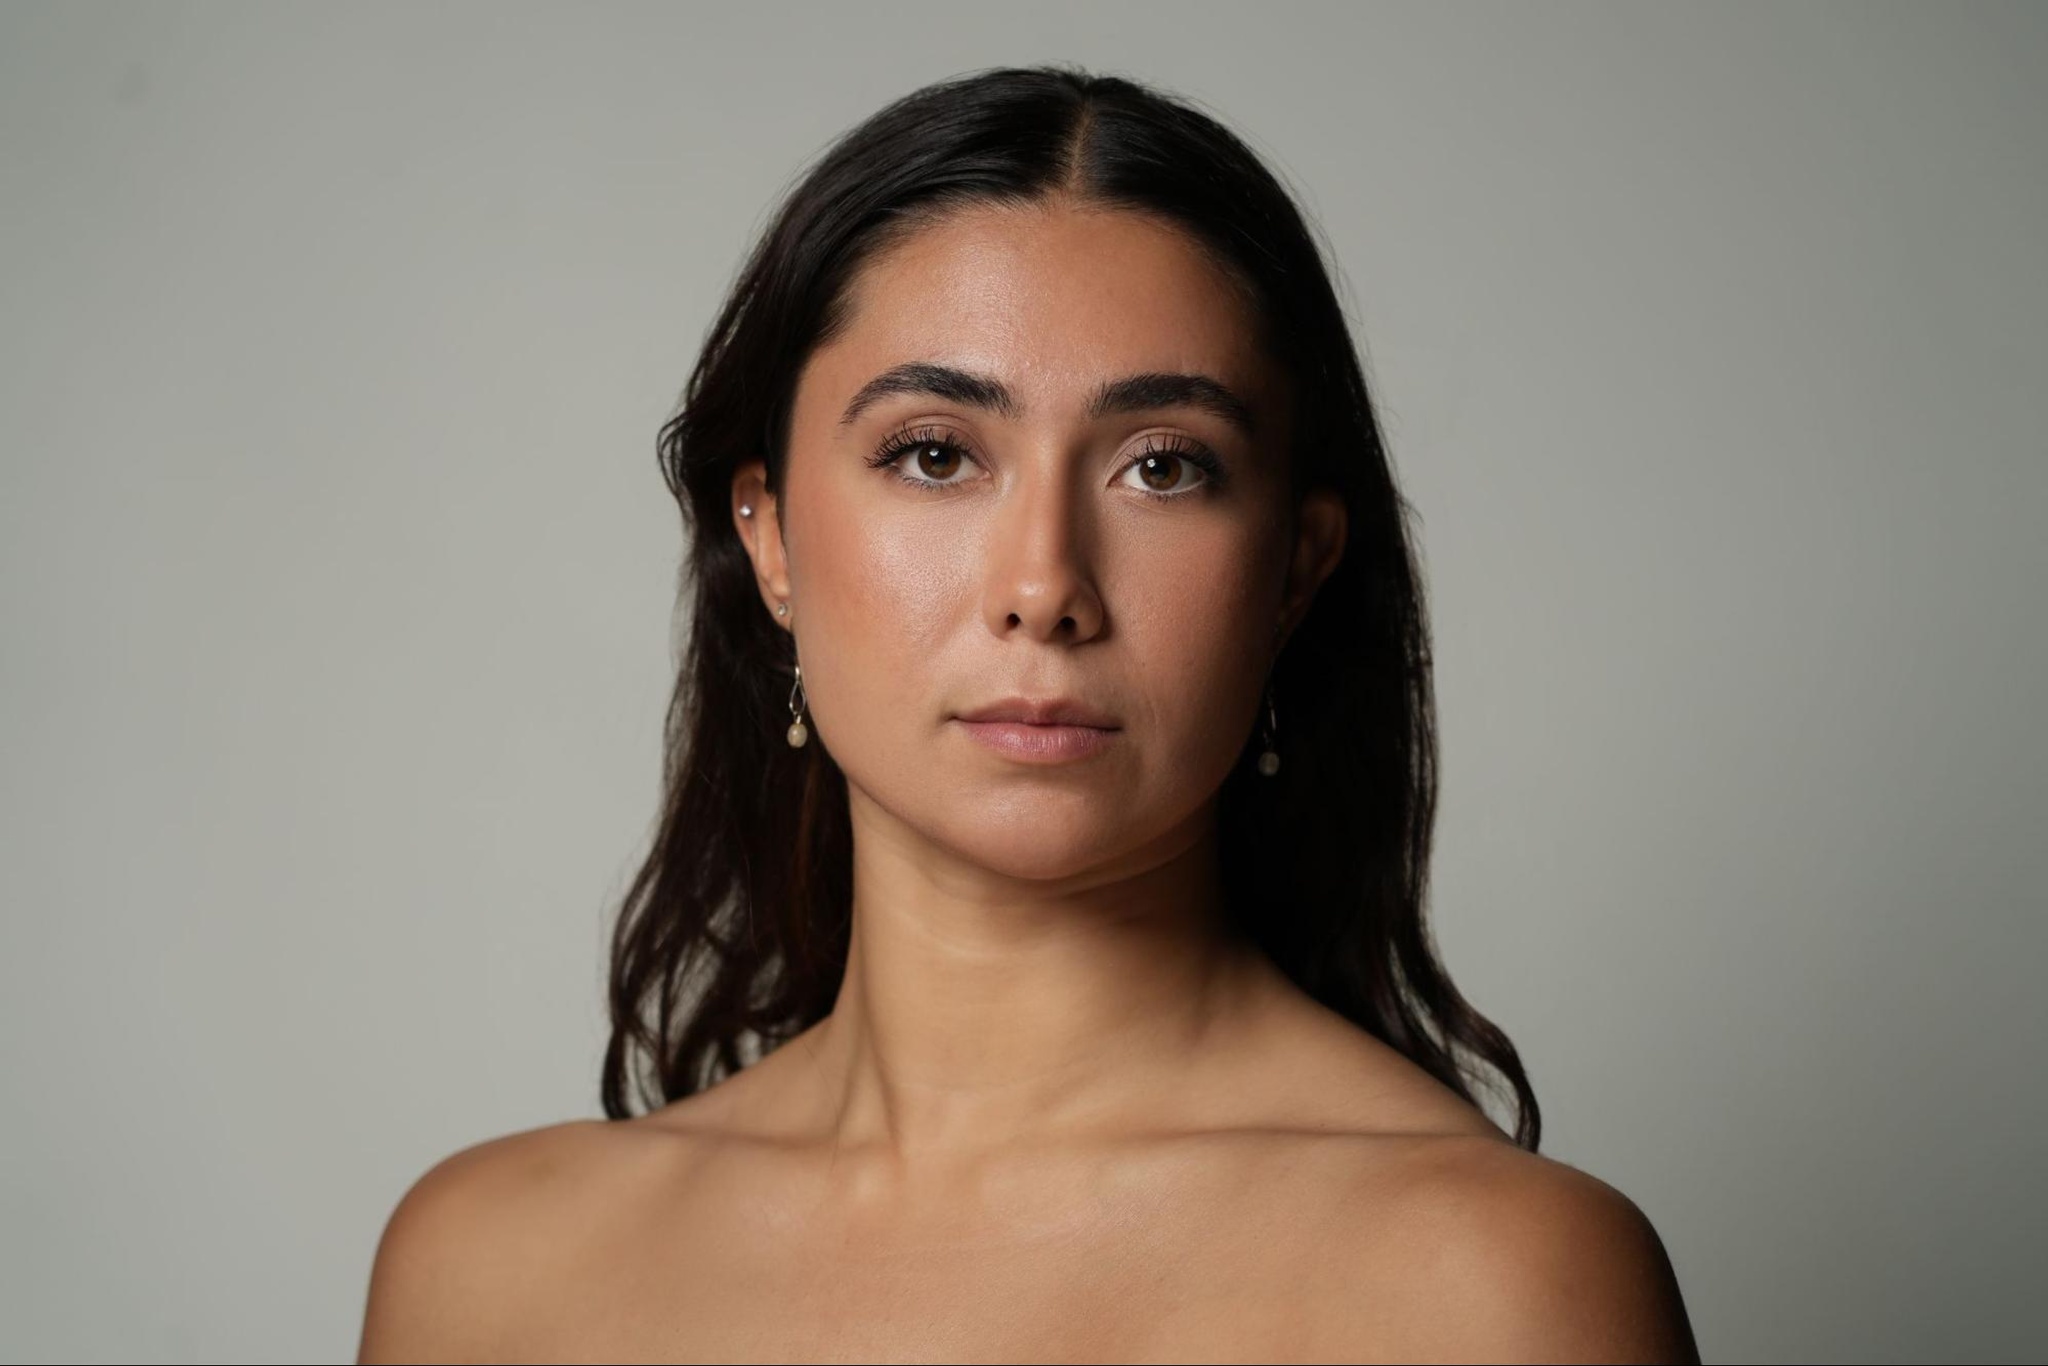 A headshot of dancer Cassandra D’Agostino. She is seen from the shoulders up and has long dark brown hair that falls behind her bare shoulders. She looks directly at us with intention. 